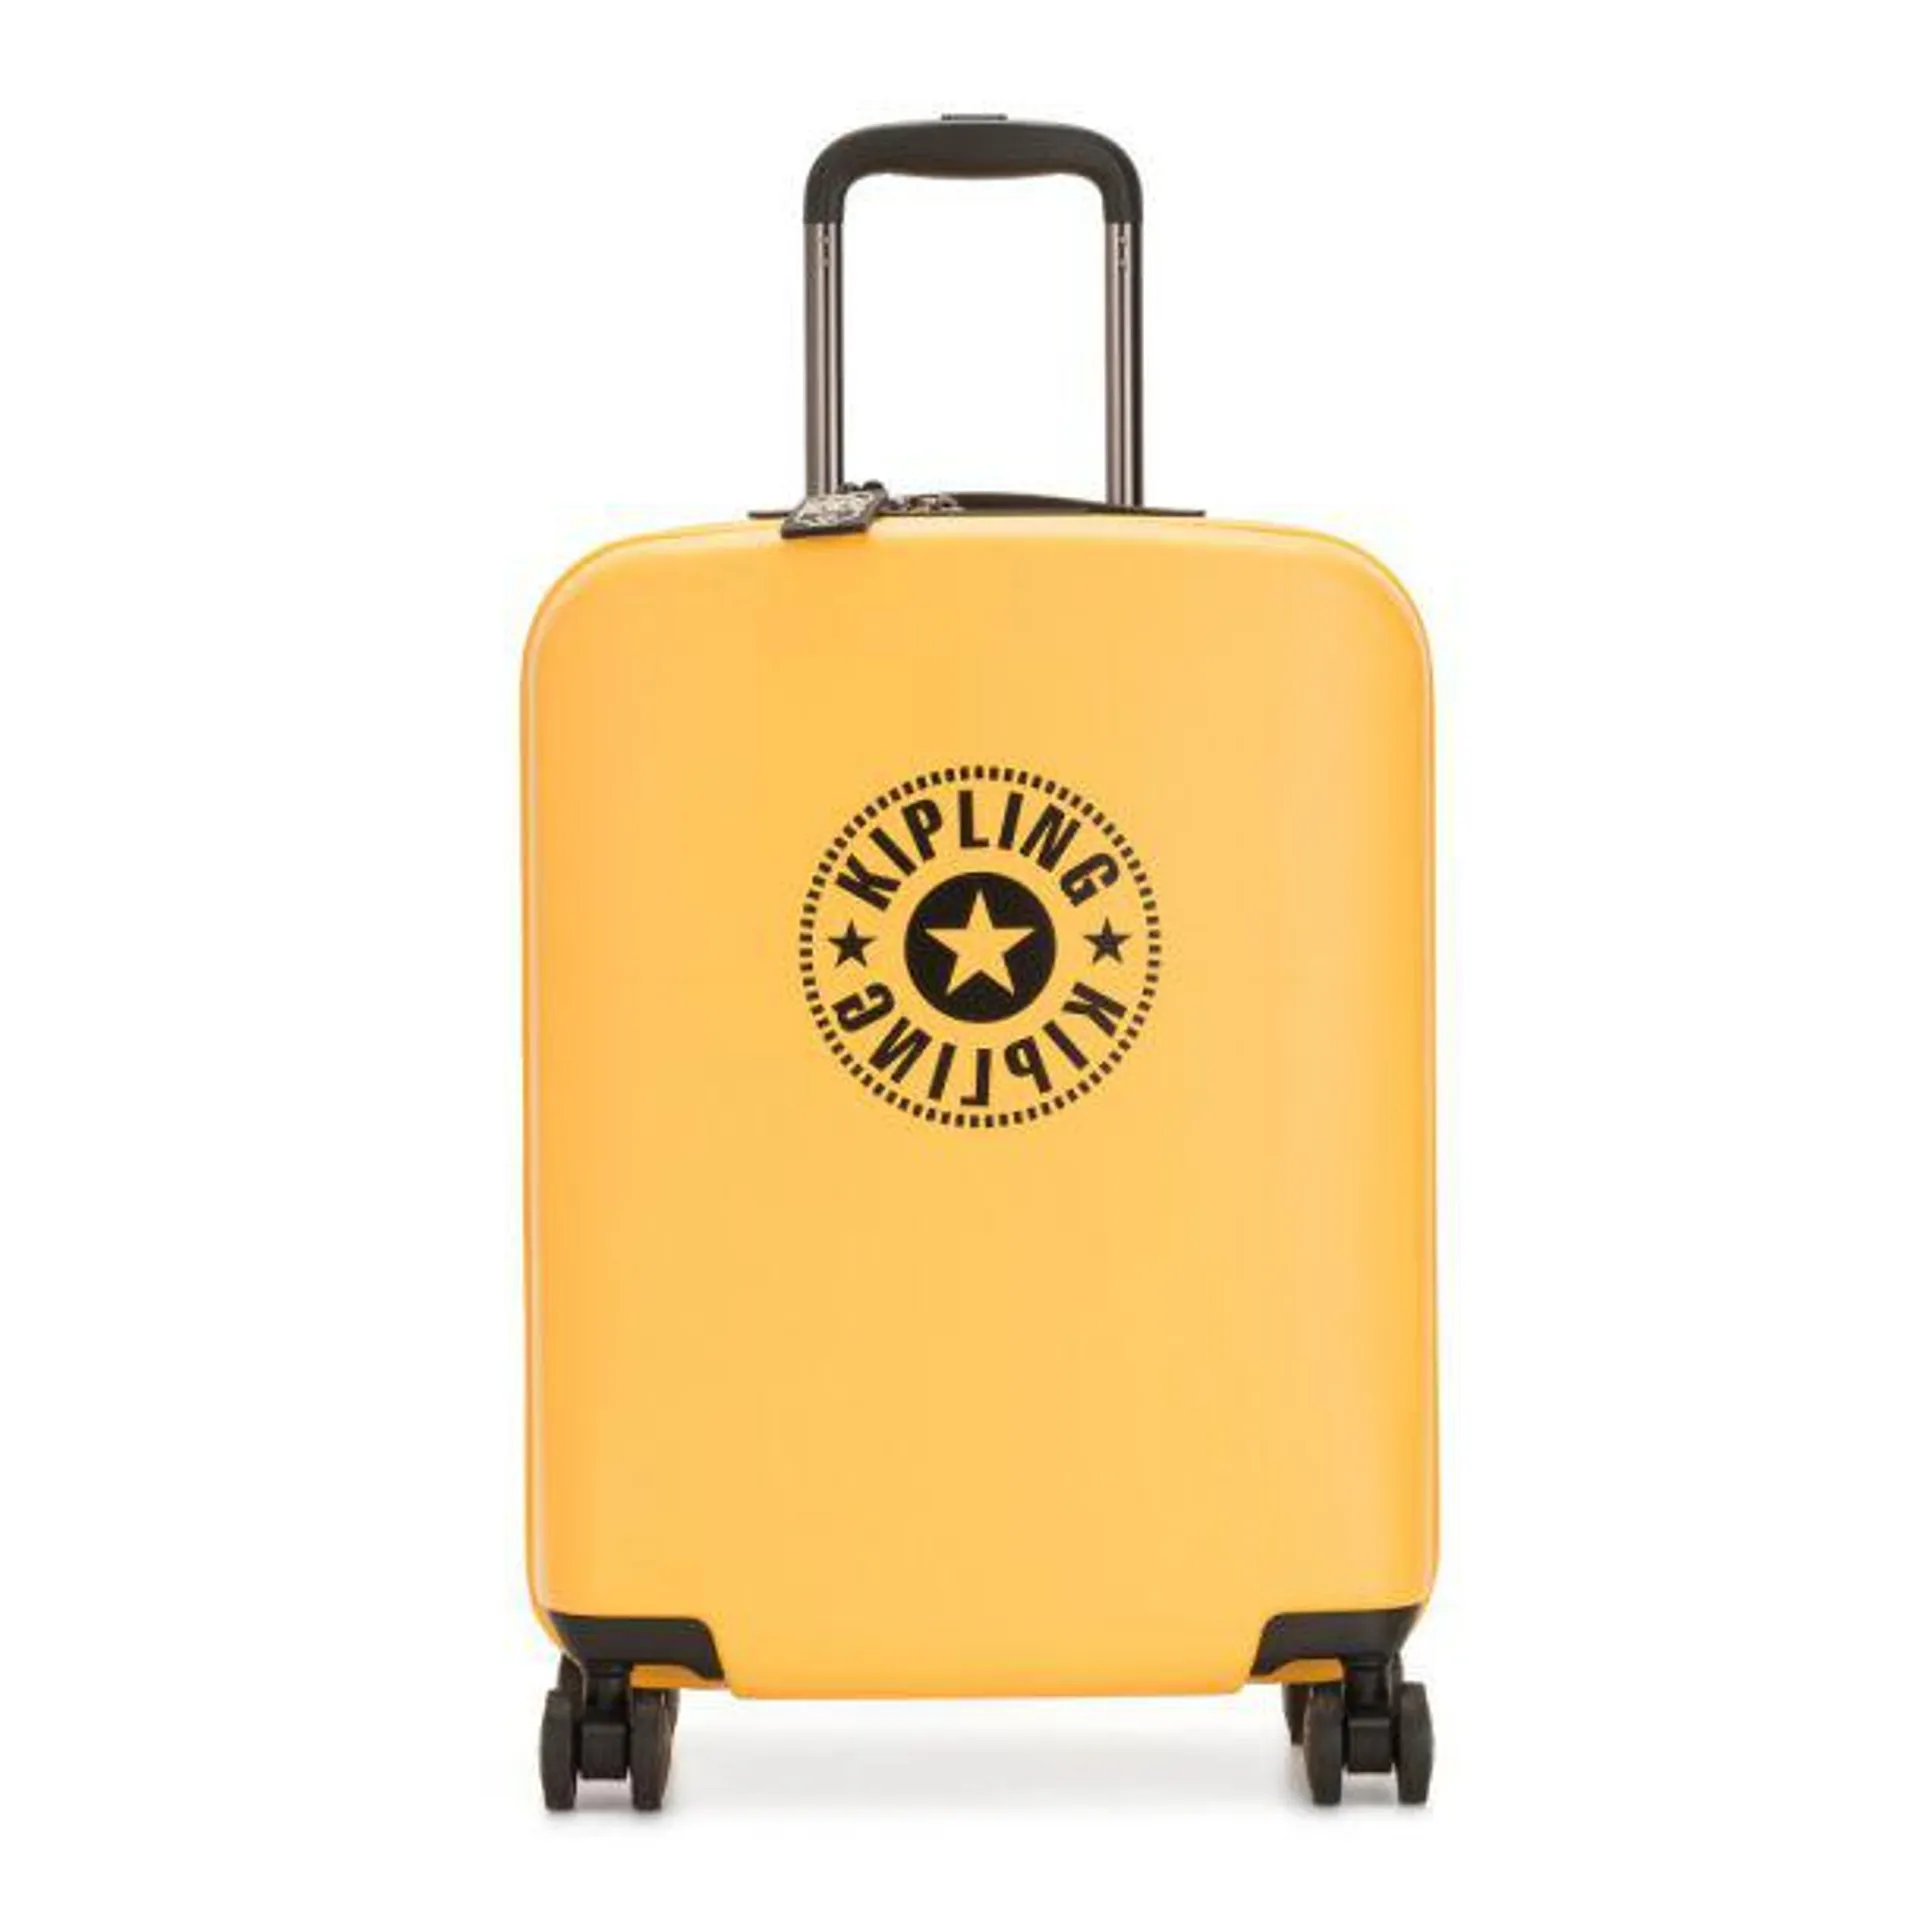 Kipling Luggage Curiosity Small New Classics Hardsided Carry On Spind - Vivid Yellow